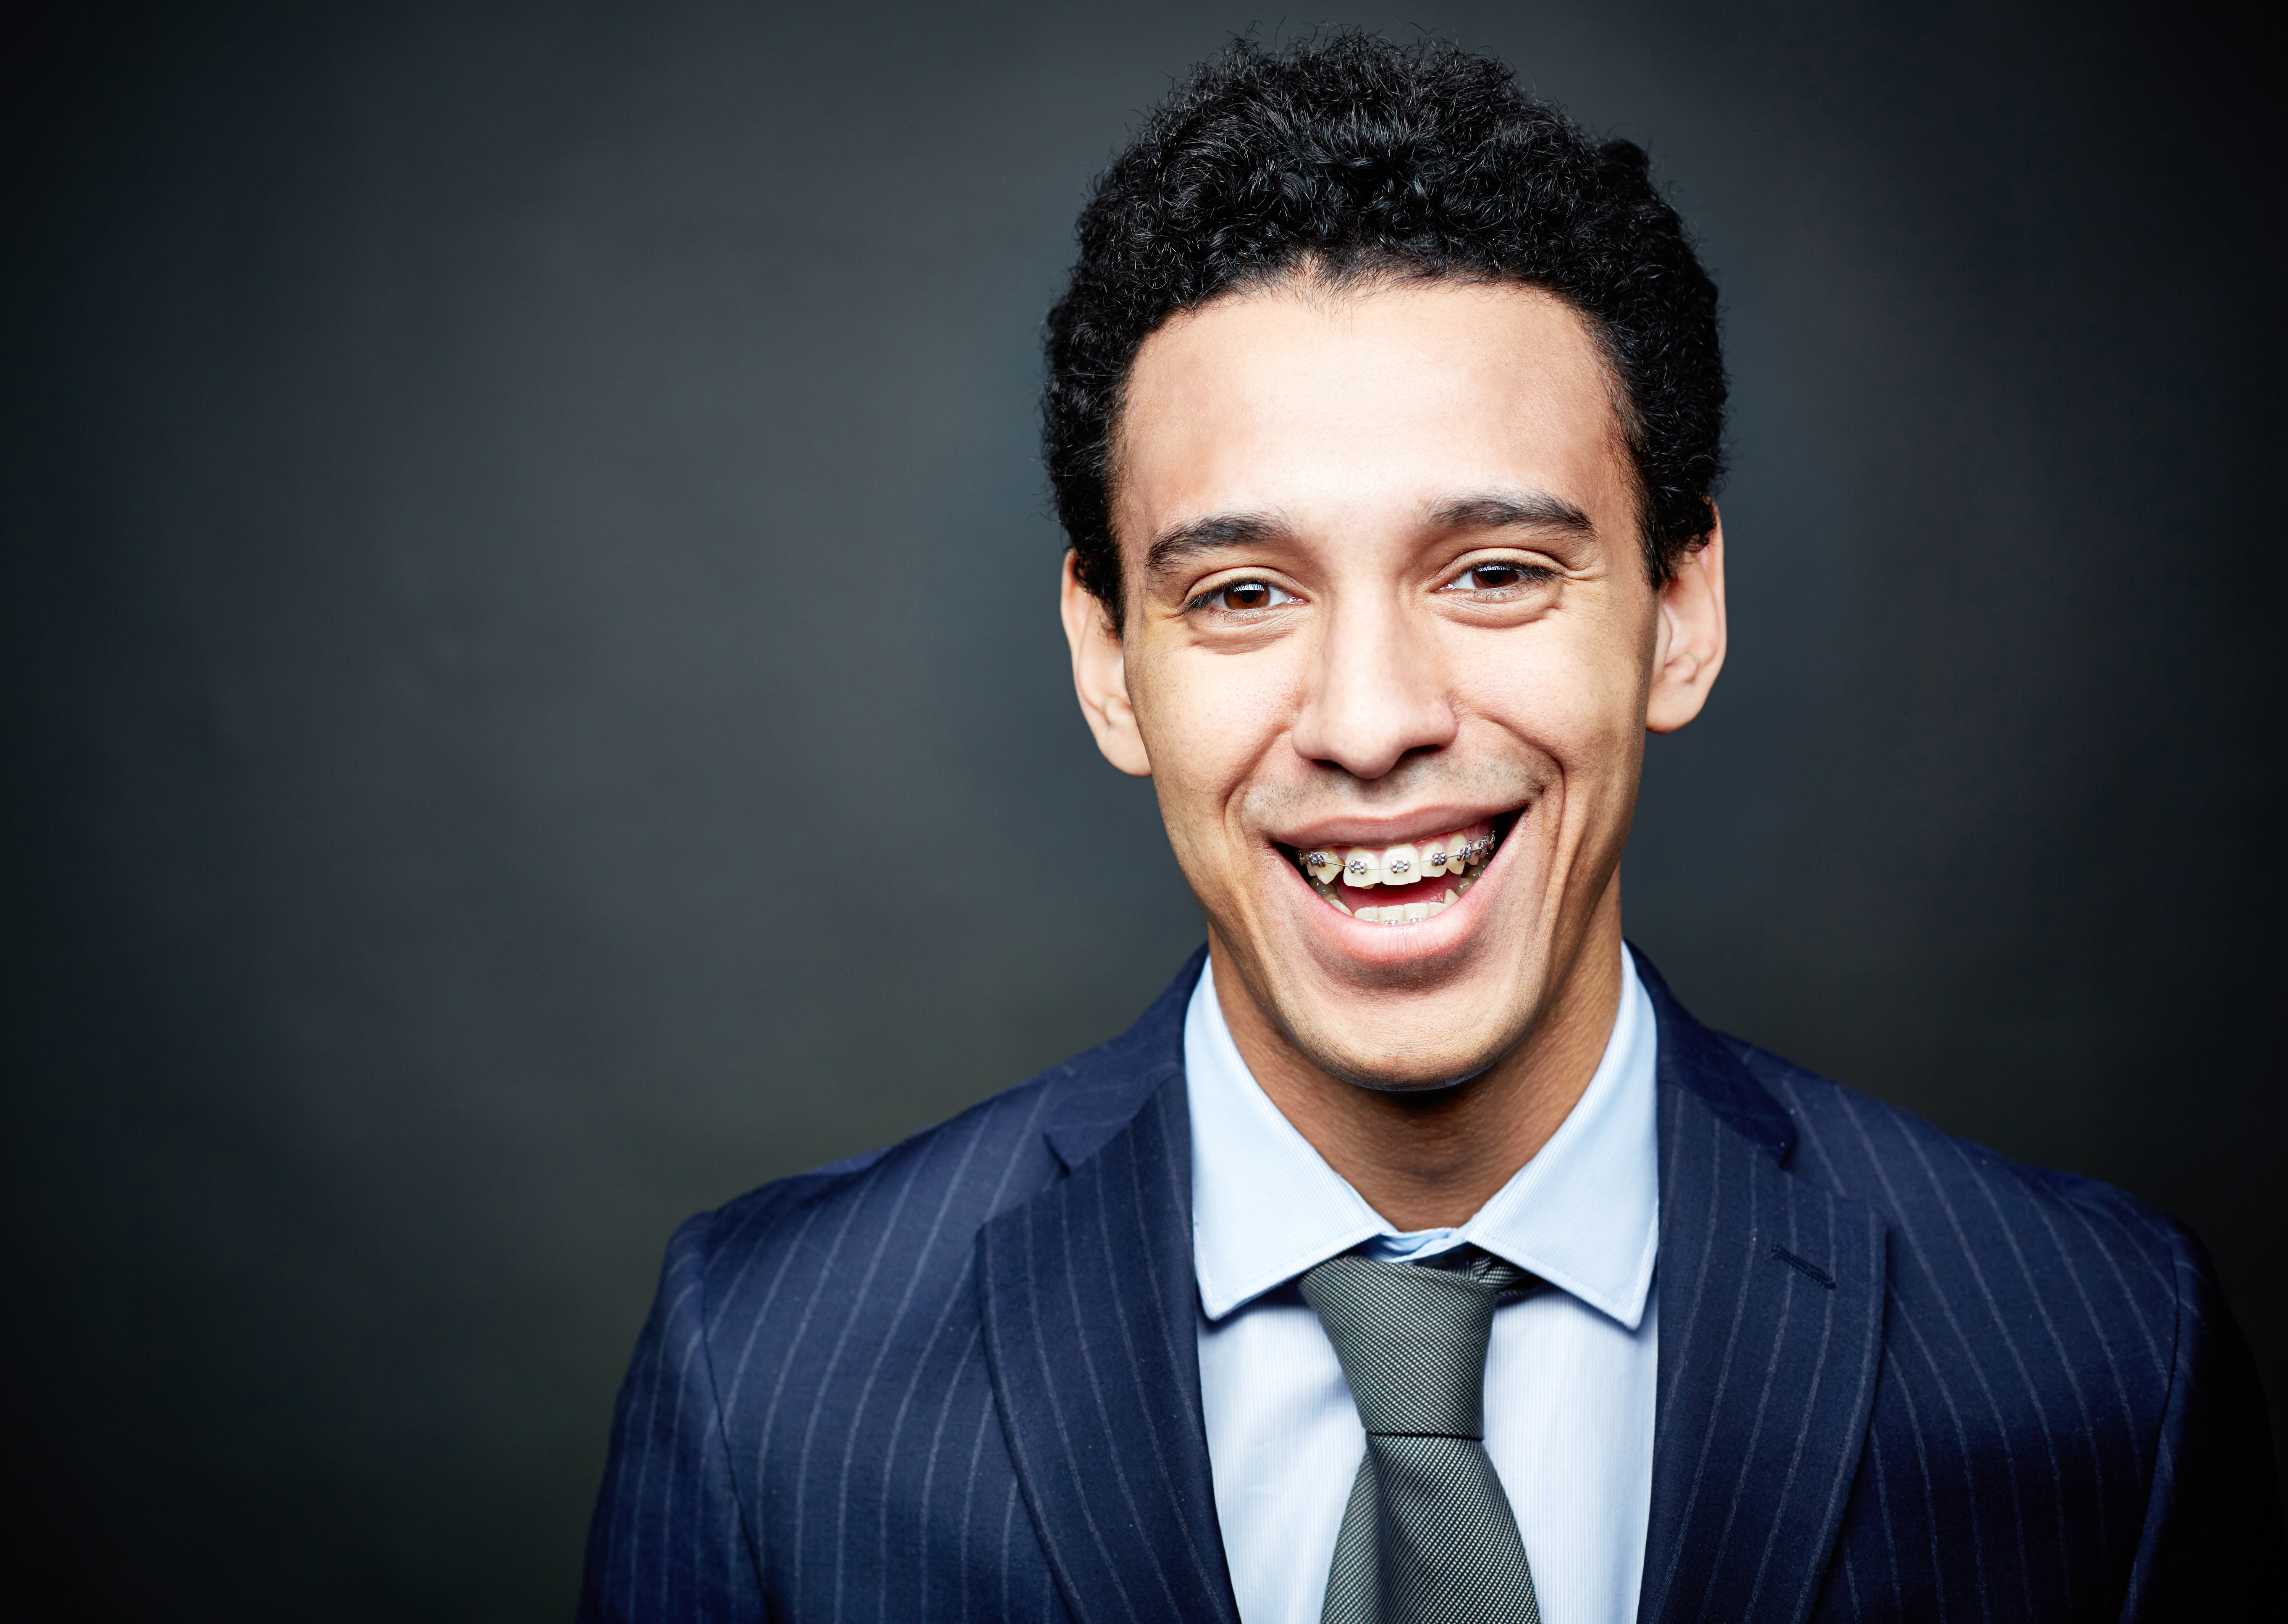 man smiling with braces